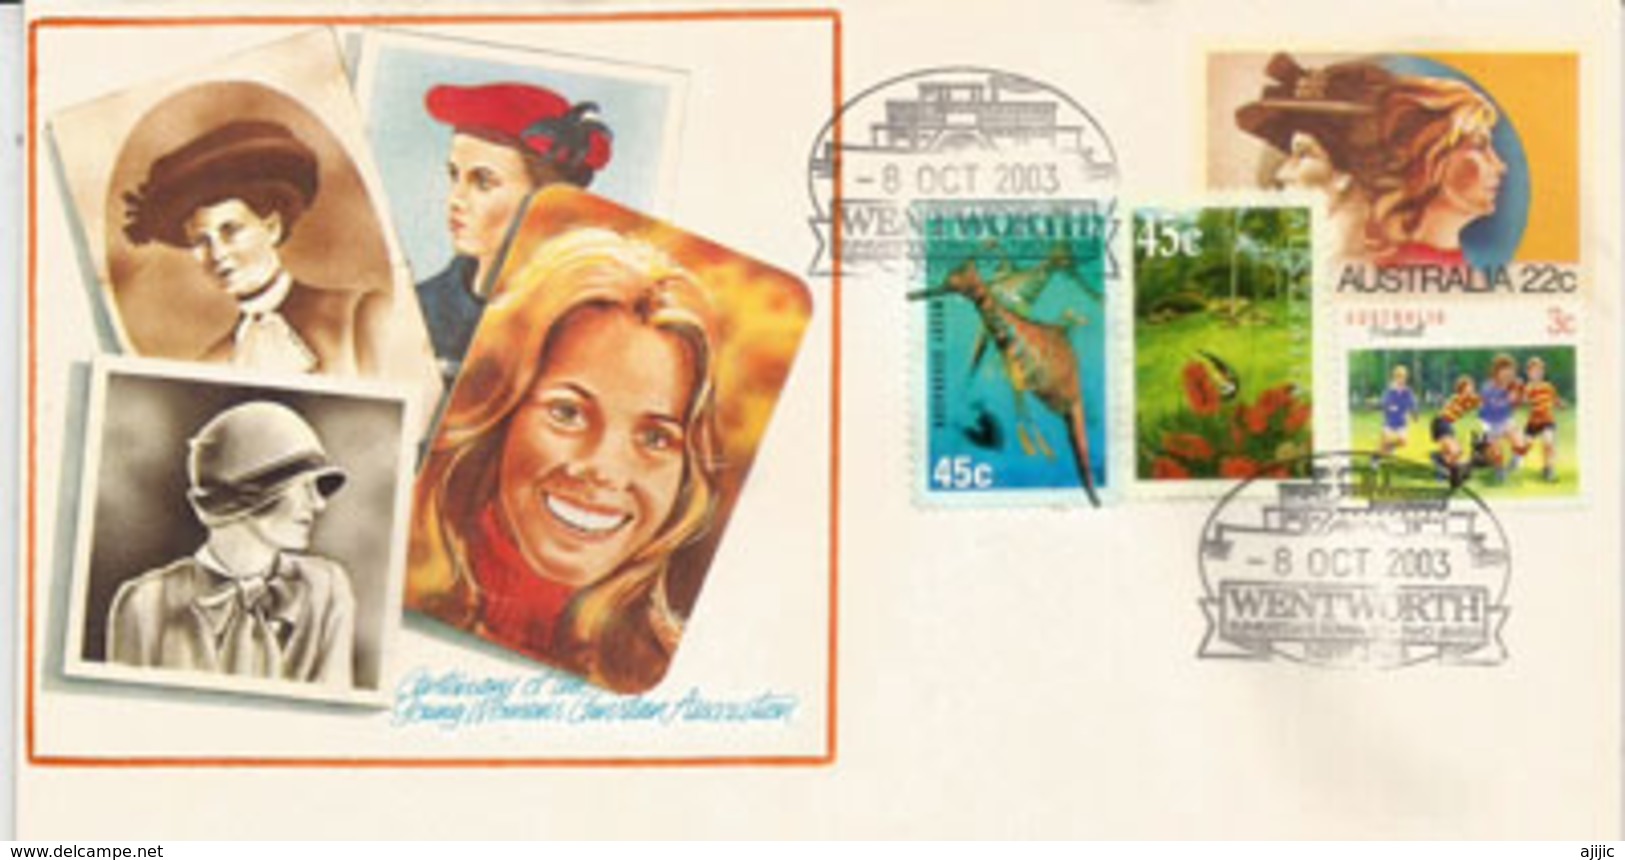 Small Border Town Of Wentworth,NSW, At The Darling & The Murray Confluence,special Cover - Errors, Freaks & Oddities (EFO)